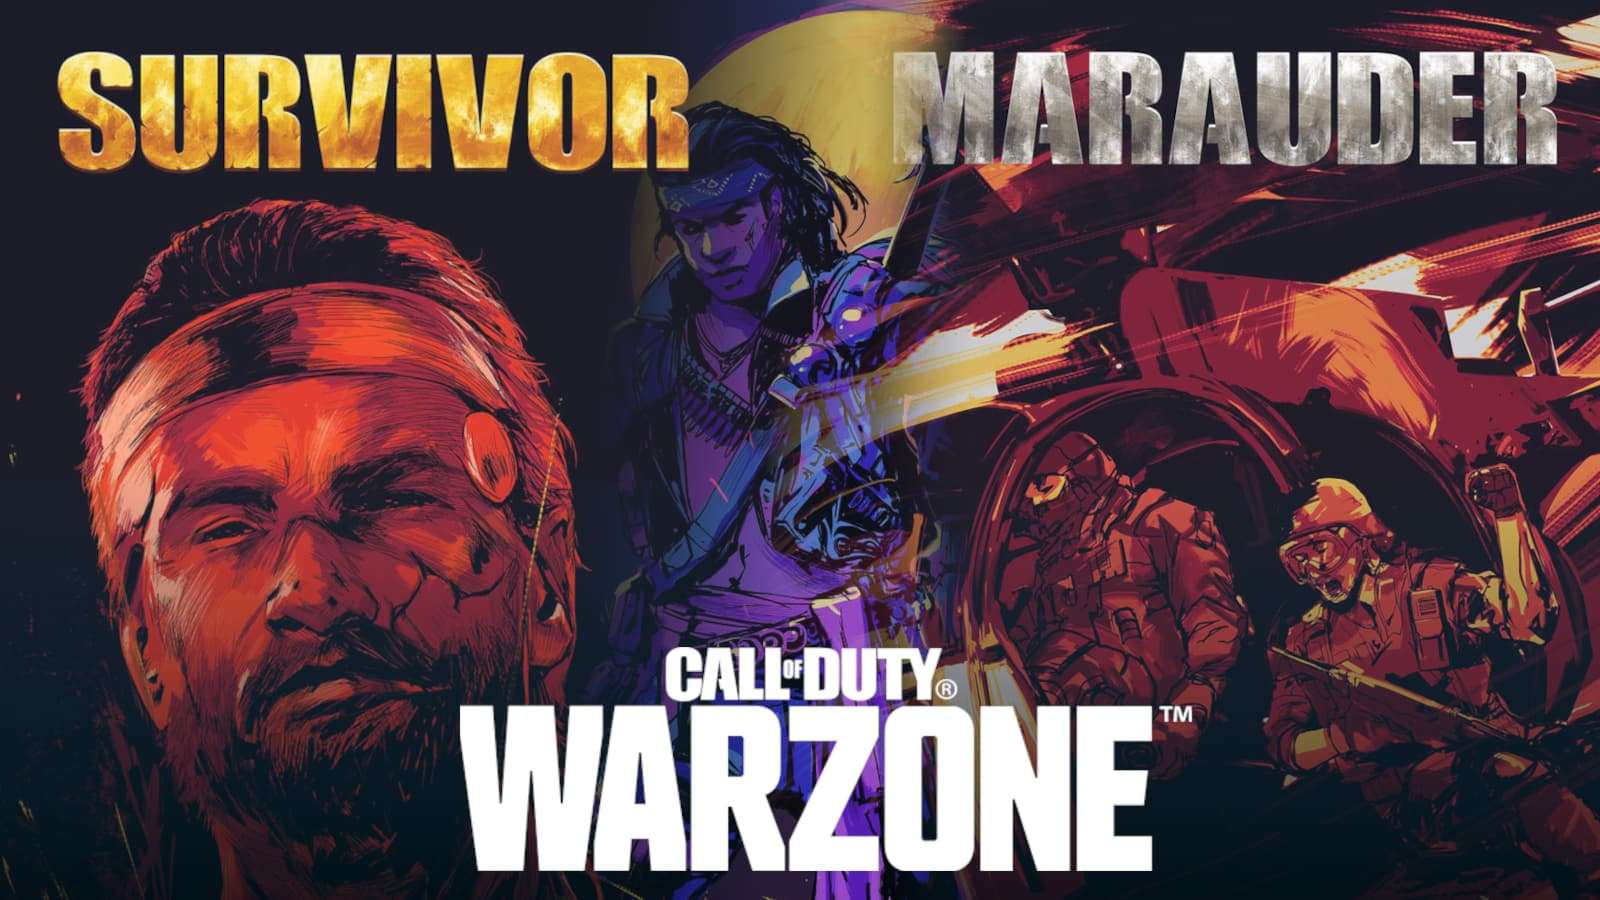 call of duty warzone role call player types survivor marauder